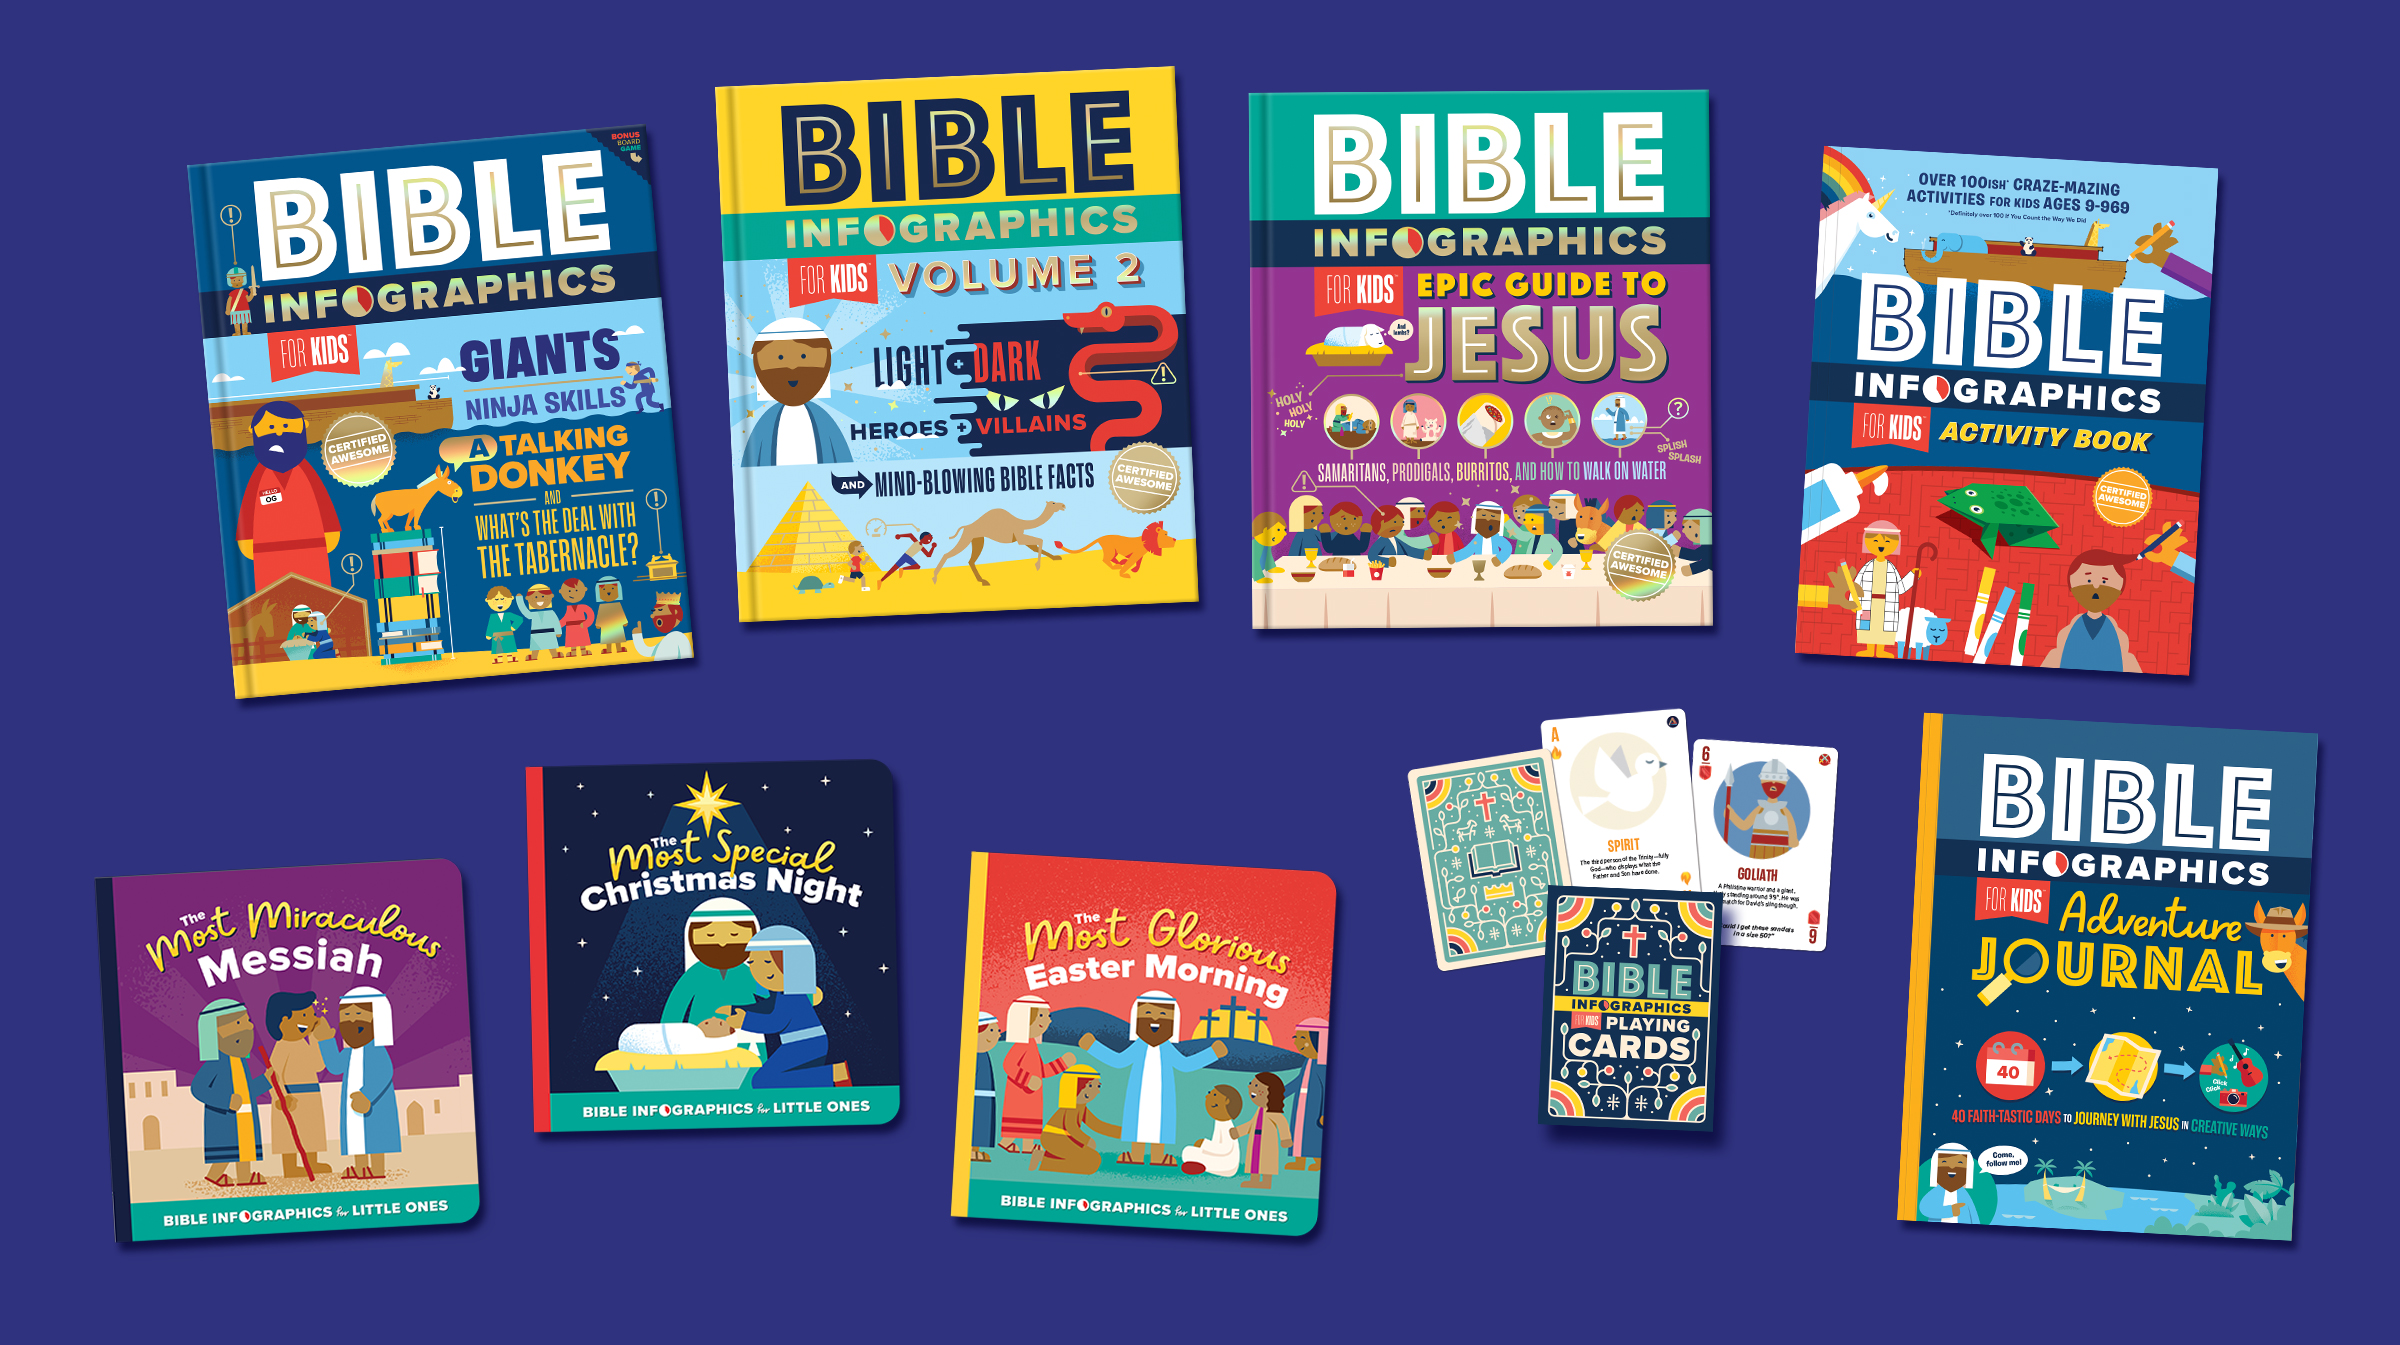 The Bible Infographic for Kids Series